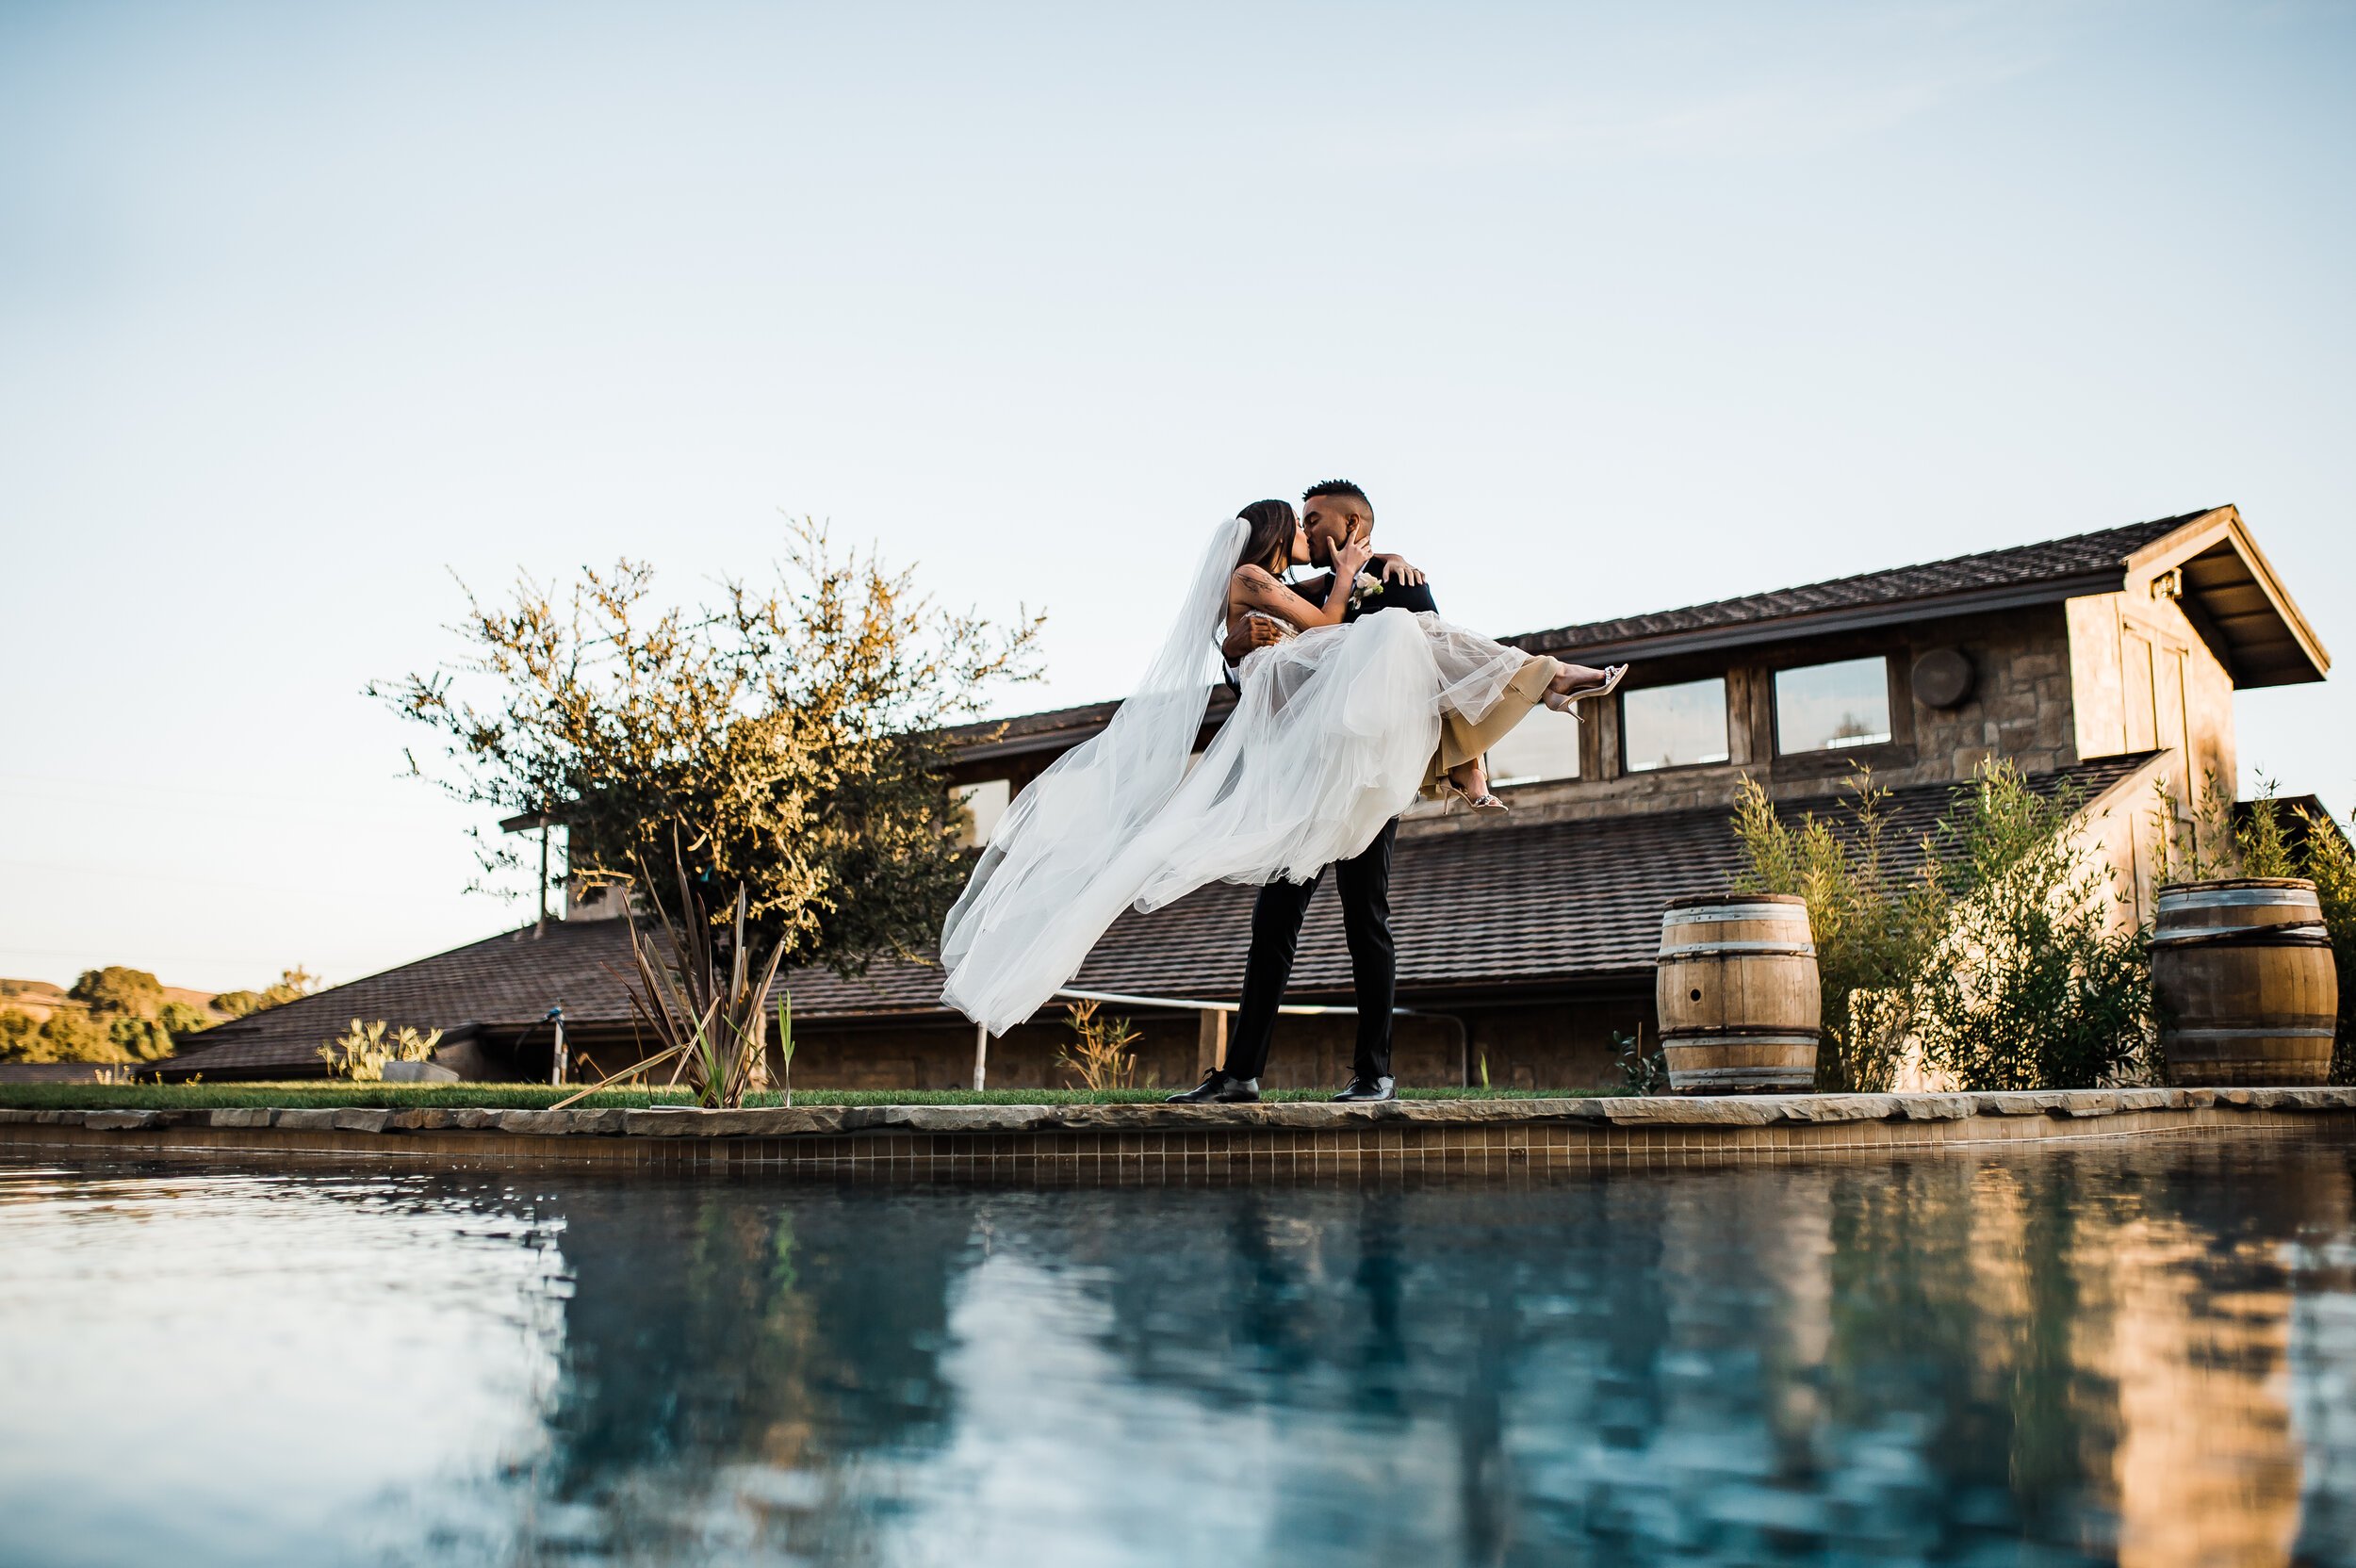 www.santabarbarawedding.com | The Tavern at Zaca Creek | Events by Fran | Michelle Ramirez Photography | Tangled Lotus | Friar Tux | Ever After Bridal | Jackie Romero | Bride and Groom by Pool